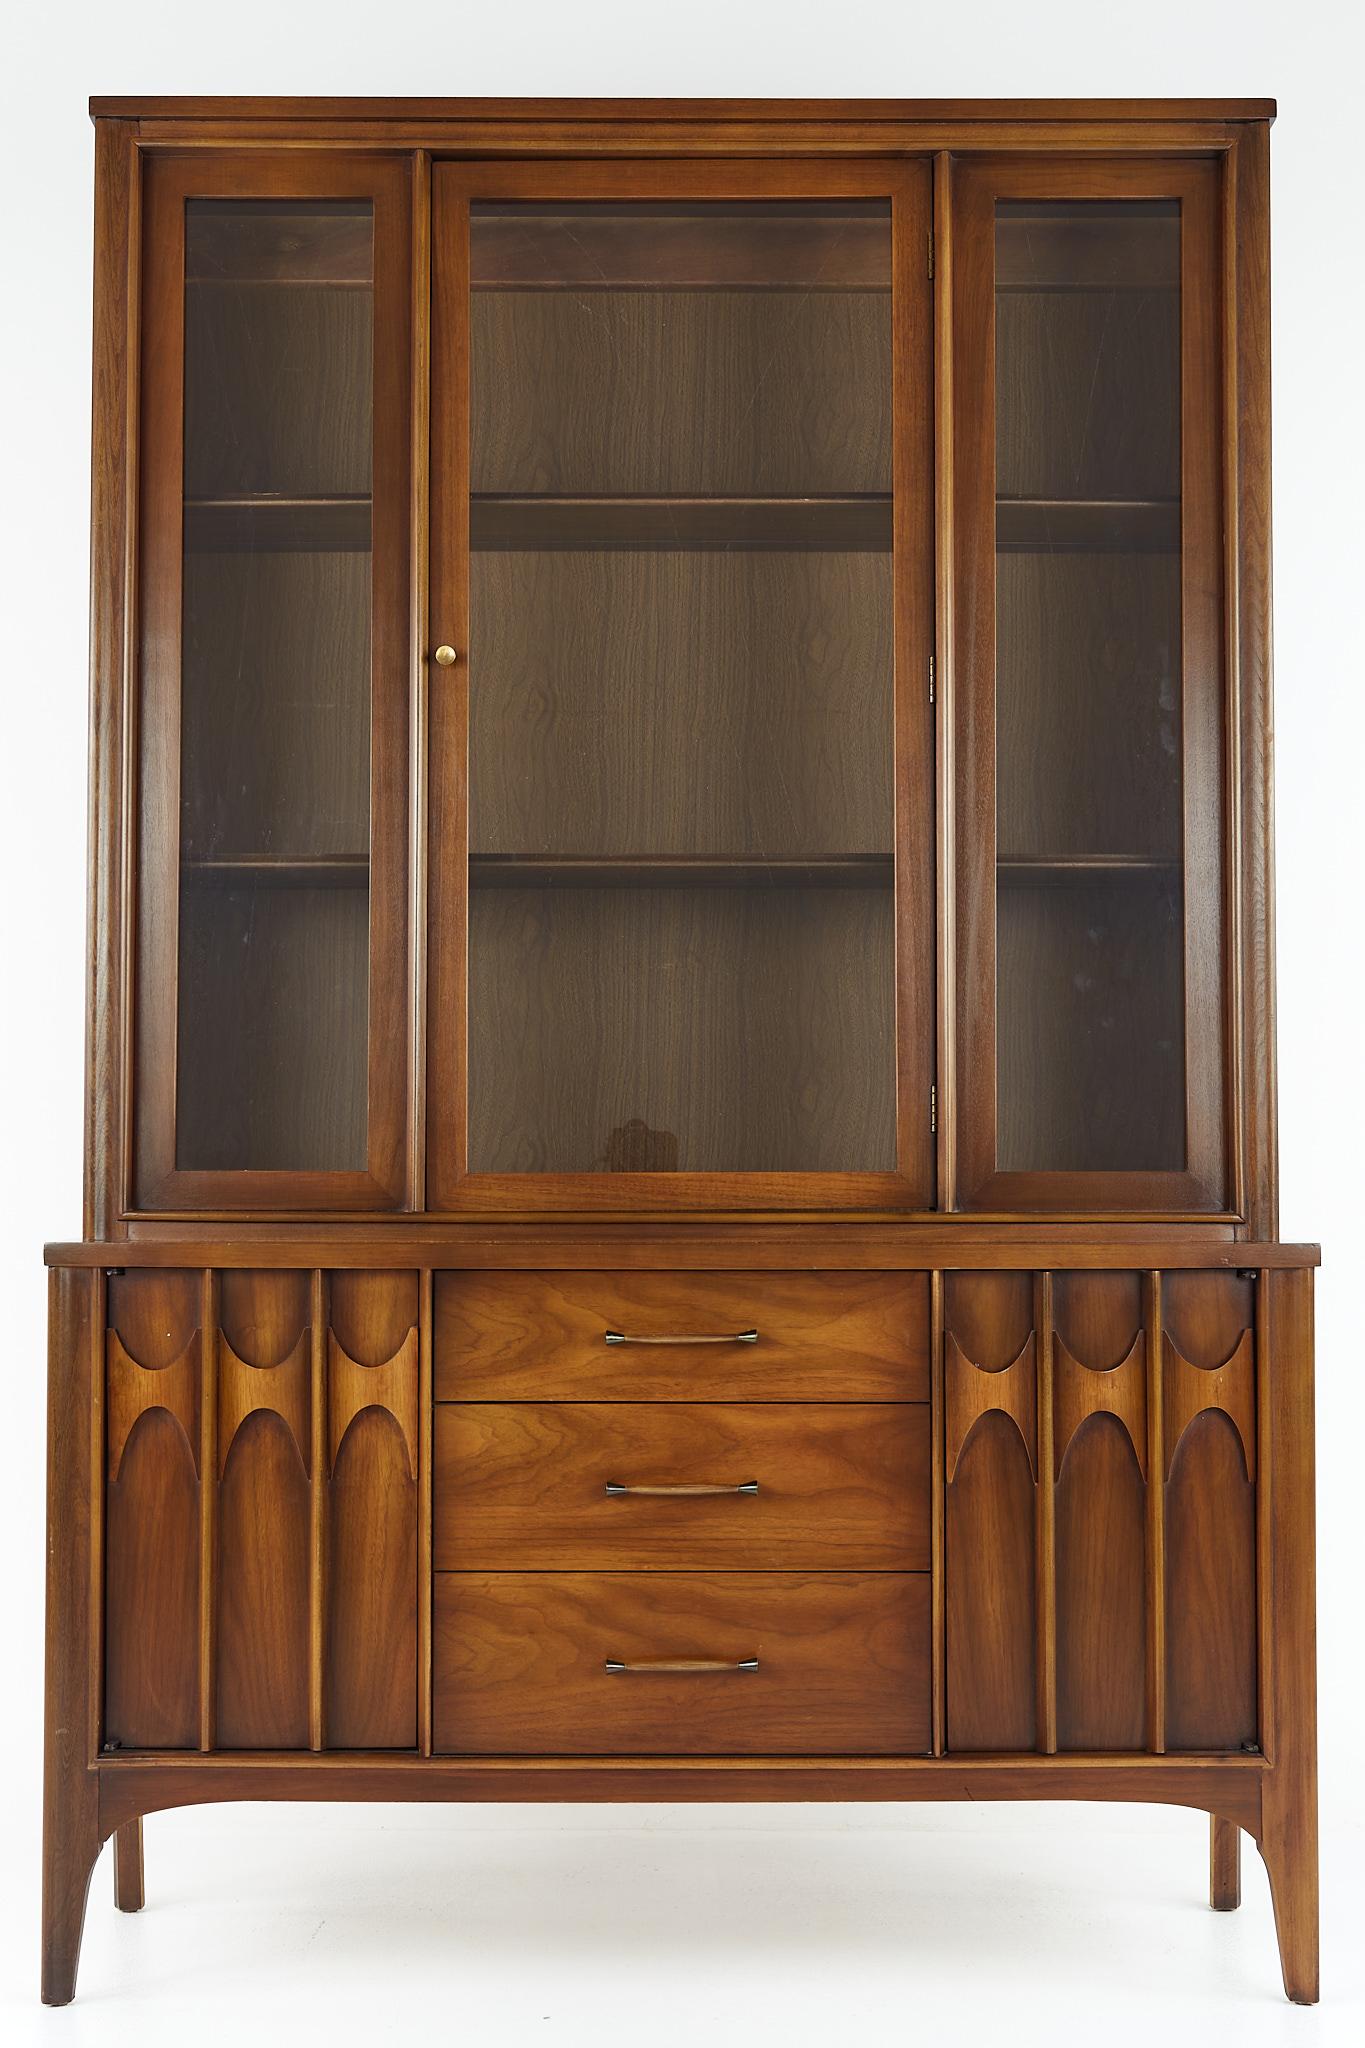 Kent Coffey perspecta mid century walnut and rosewood buffet and hutch china cabinet

This buffet measures: 47.5 wide x 15.5 deep x 72 inches high

?All pieces of furniture can be had in what we call restored vintage condition. That means the